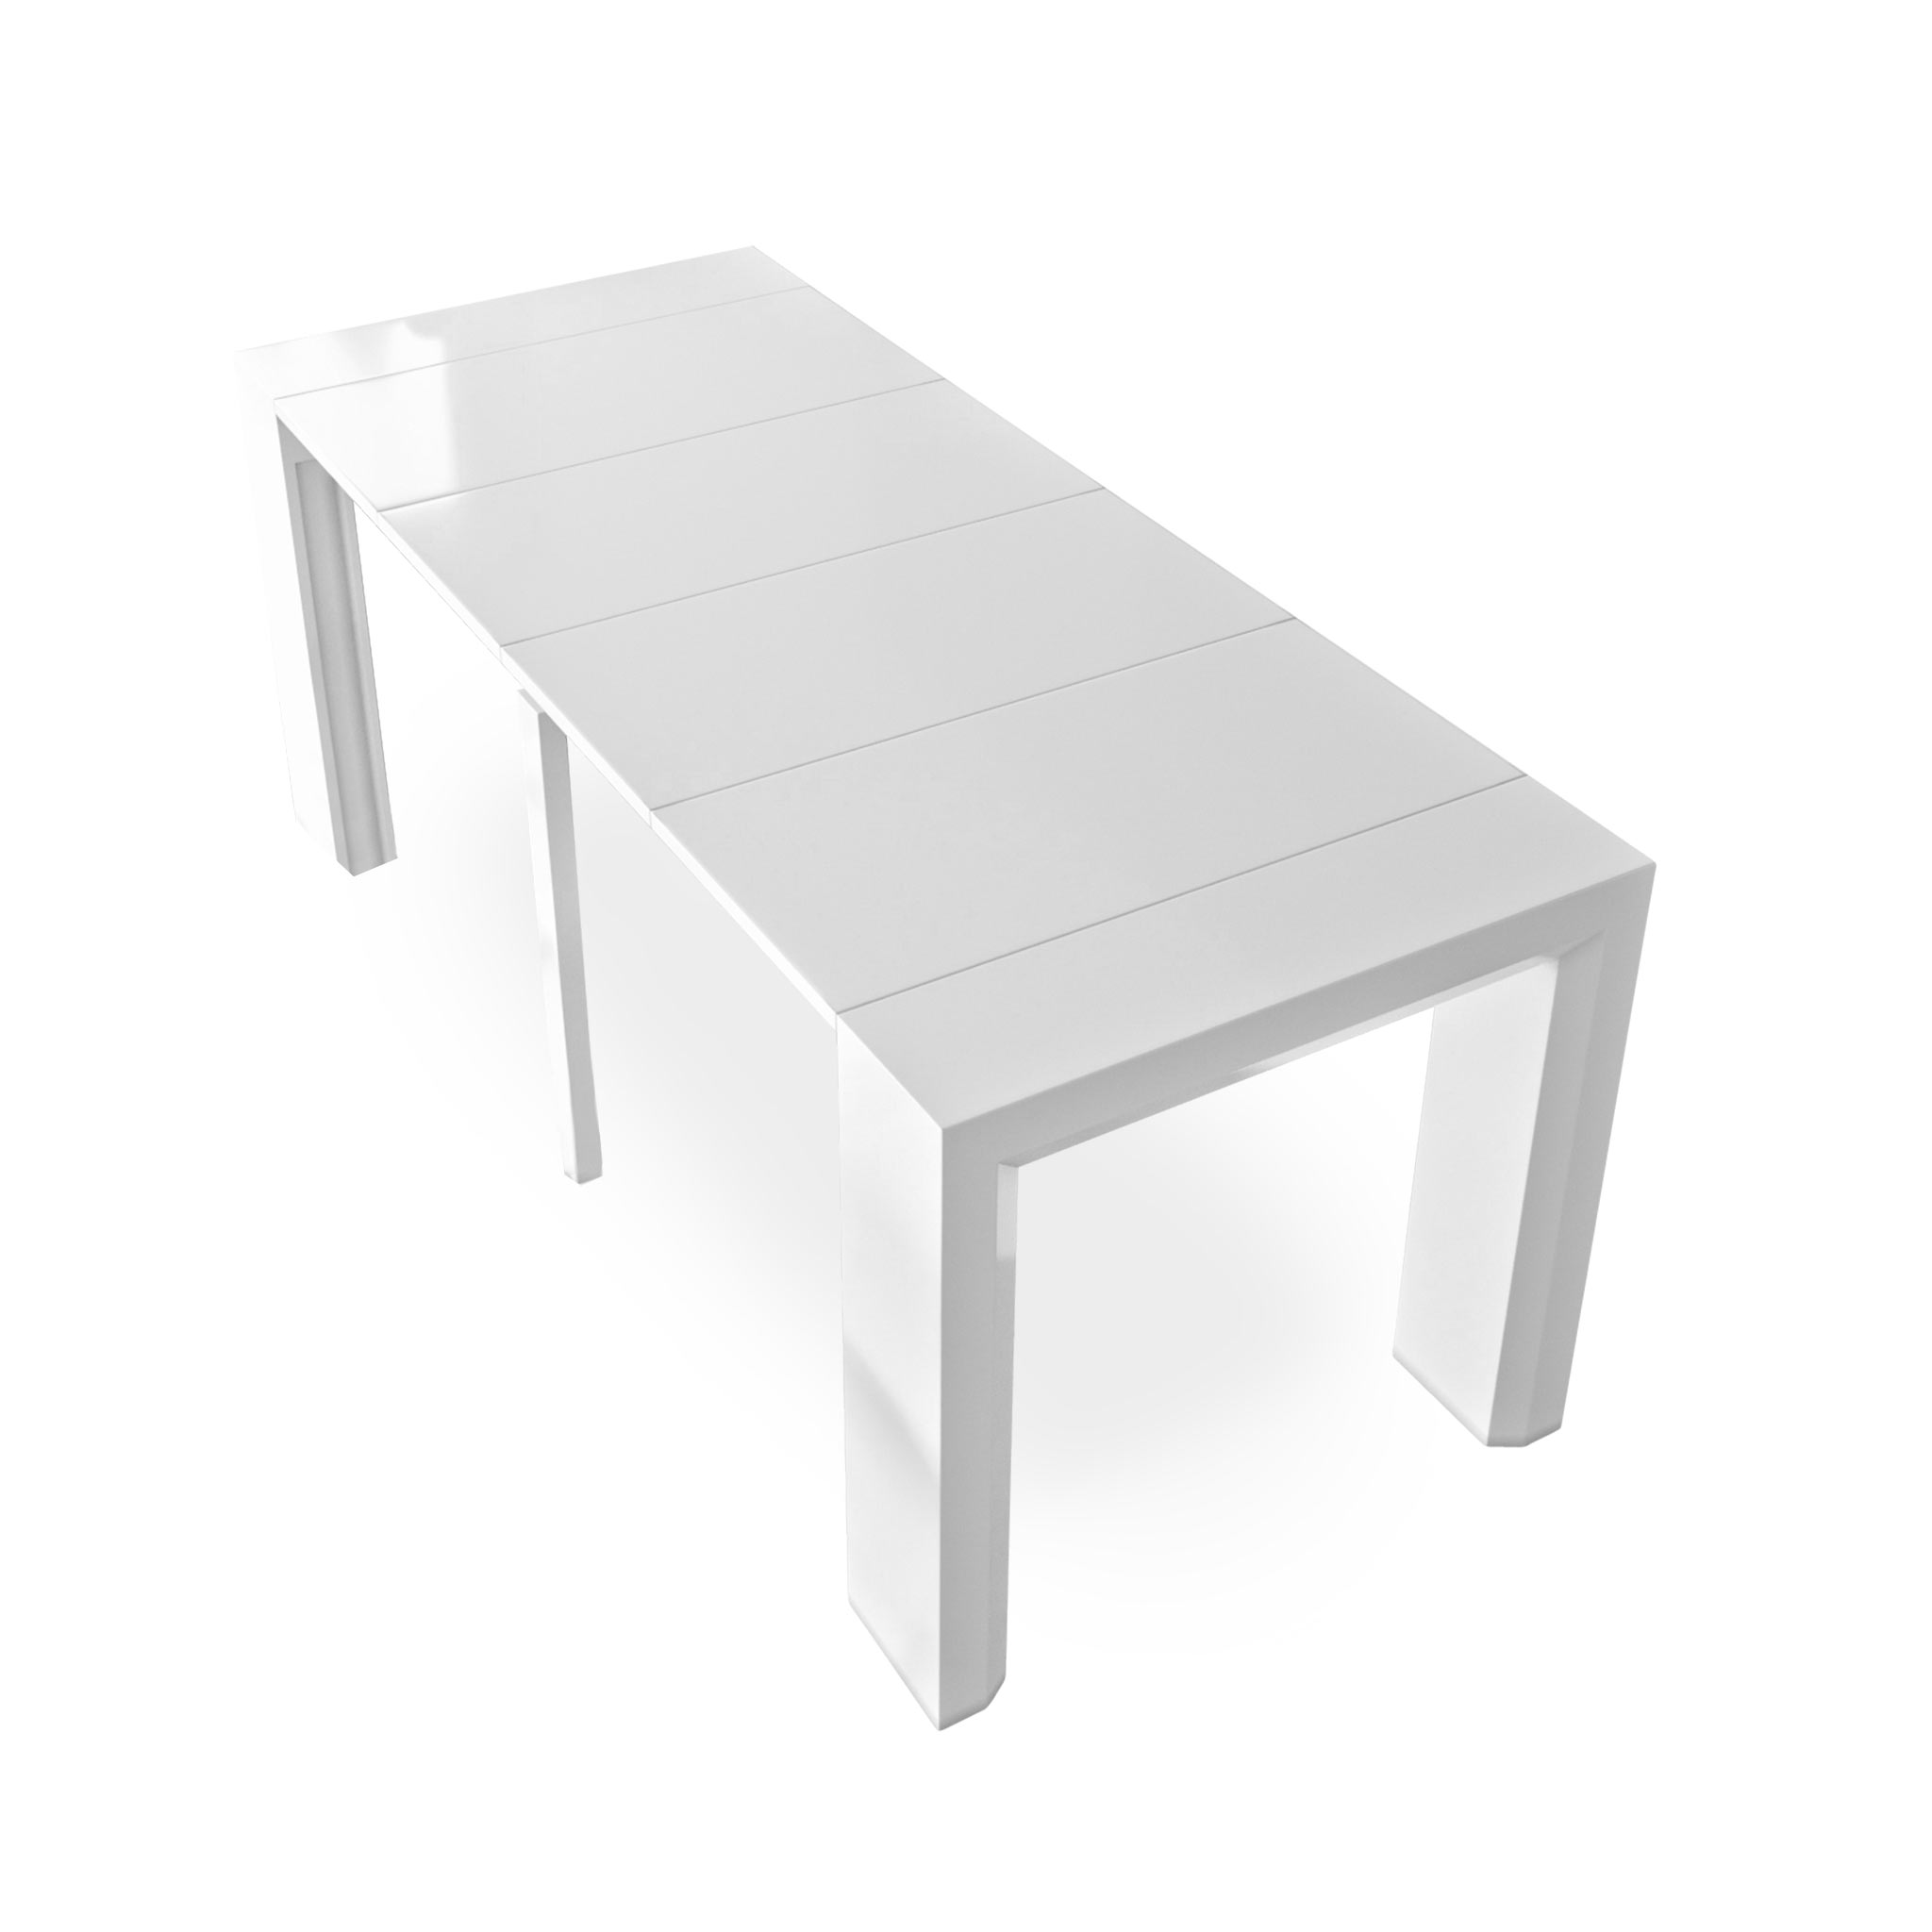 Junior Giant Revolution- Height Table - Expand Furniture - Folding Tables, Smarter Wall Beds, Space Savers